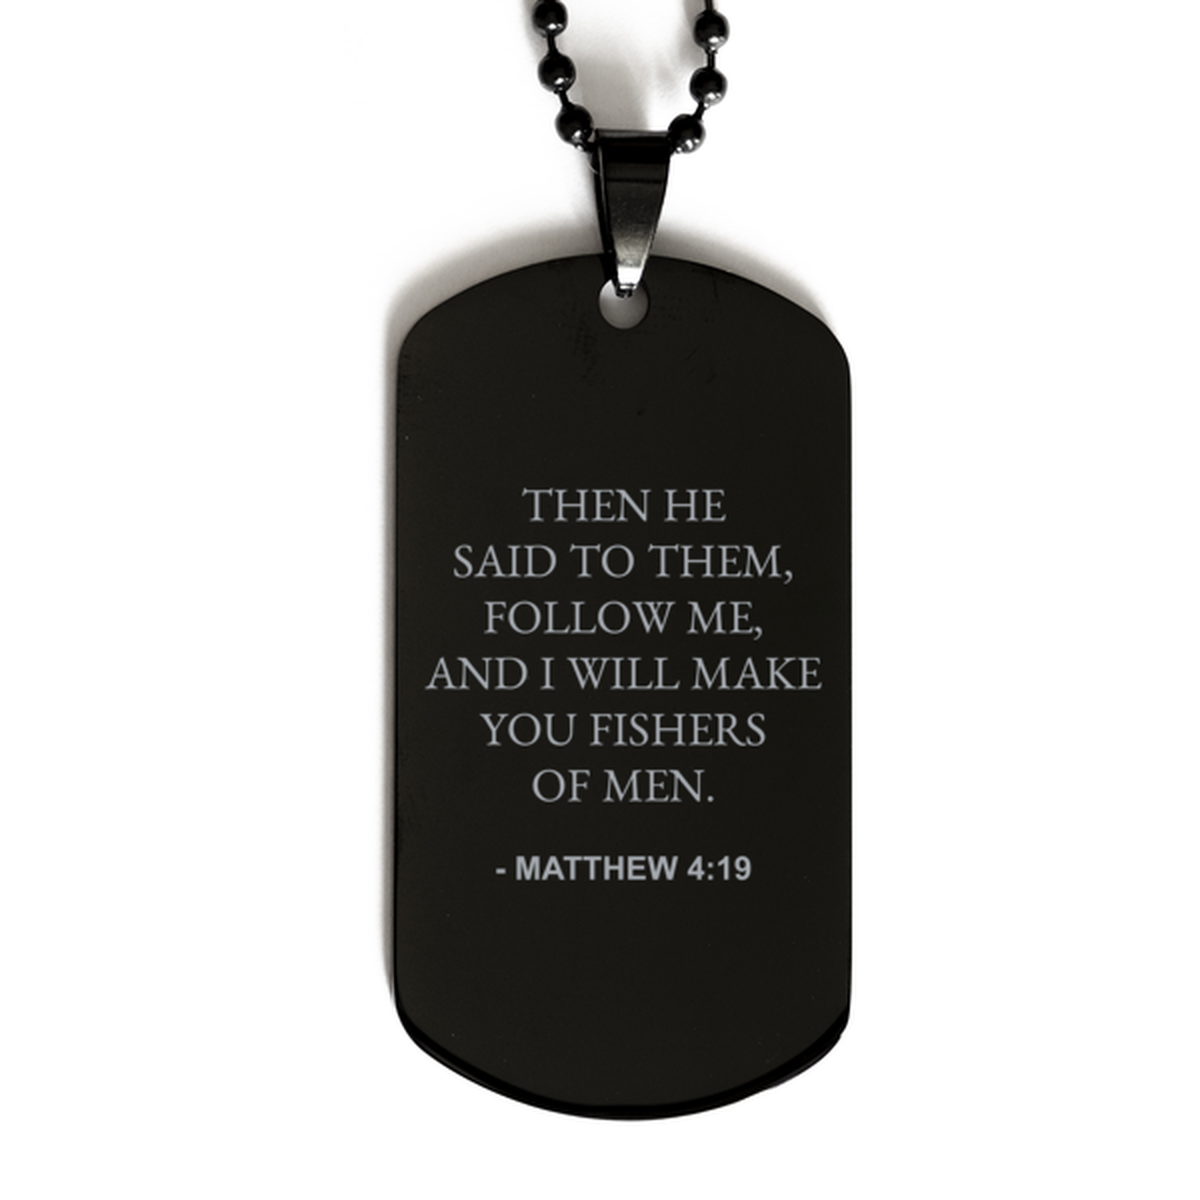 Bible Verse Black Dog Tag, Matthew 4:19 Then He Said To Them, Follow Me, And I Will, Christian Inspirational Necklace Gifts For Men Women